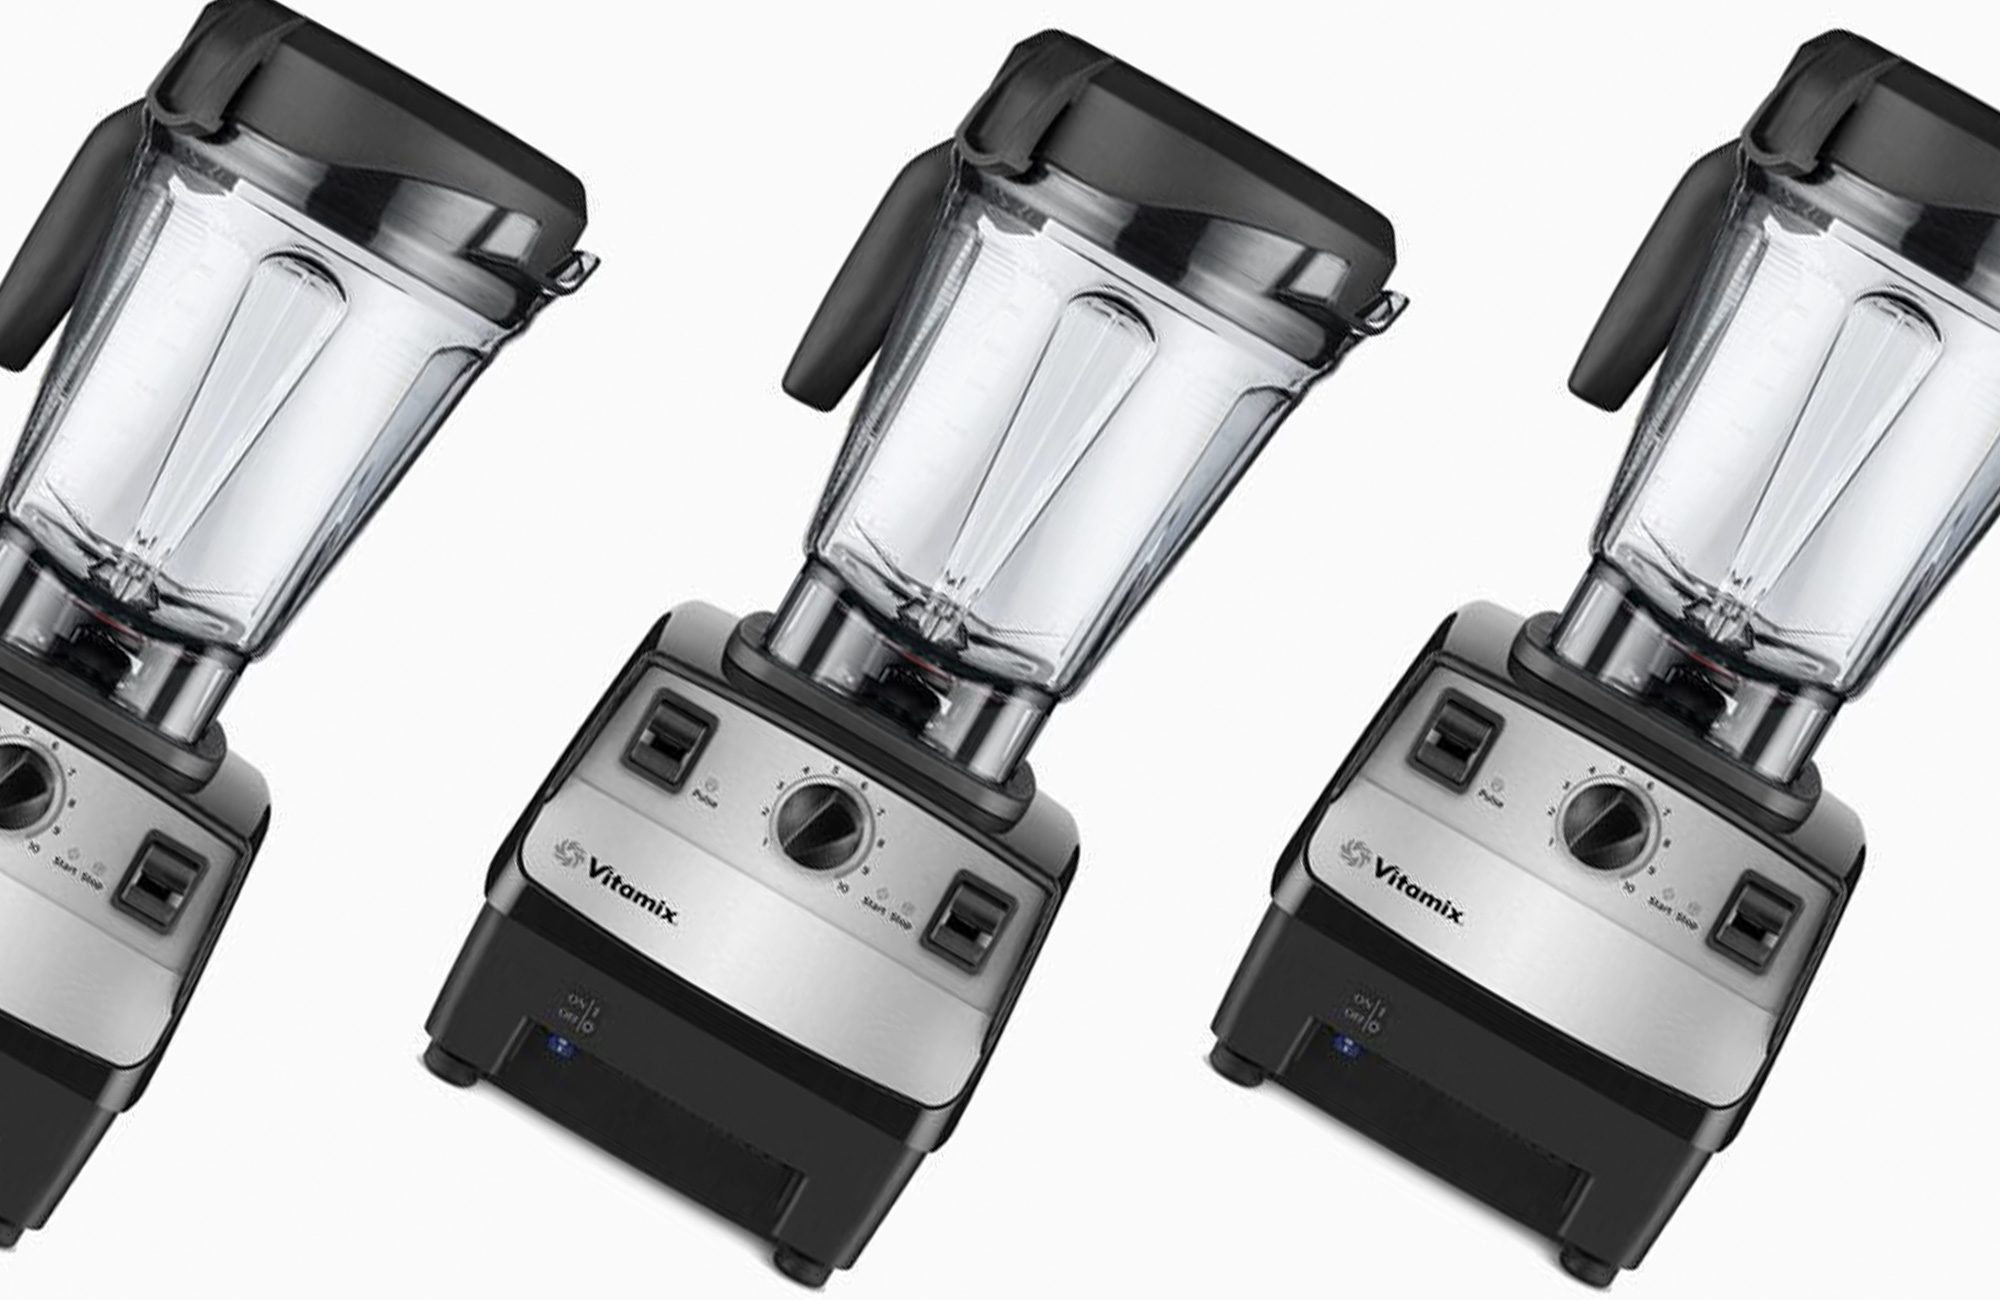 Save up to $300 on the last blender you’ll ever need during this Vitamix Flash sale